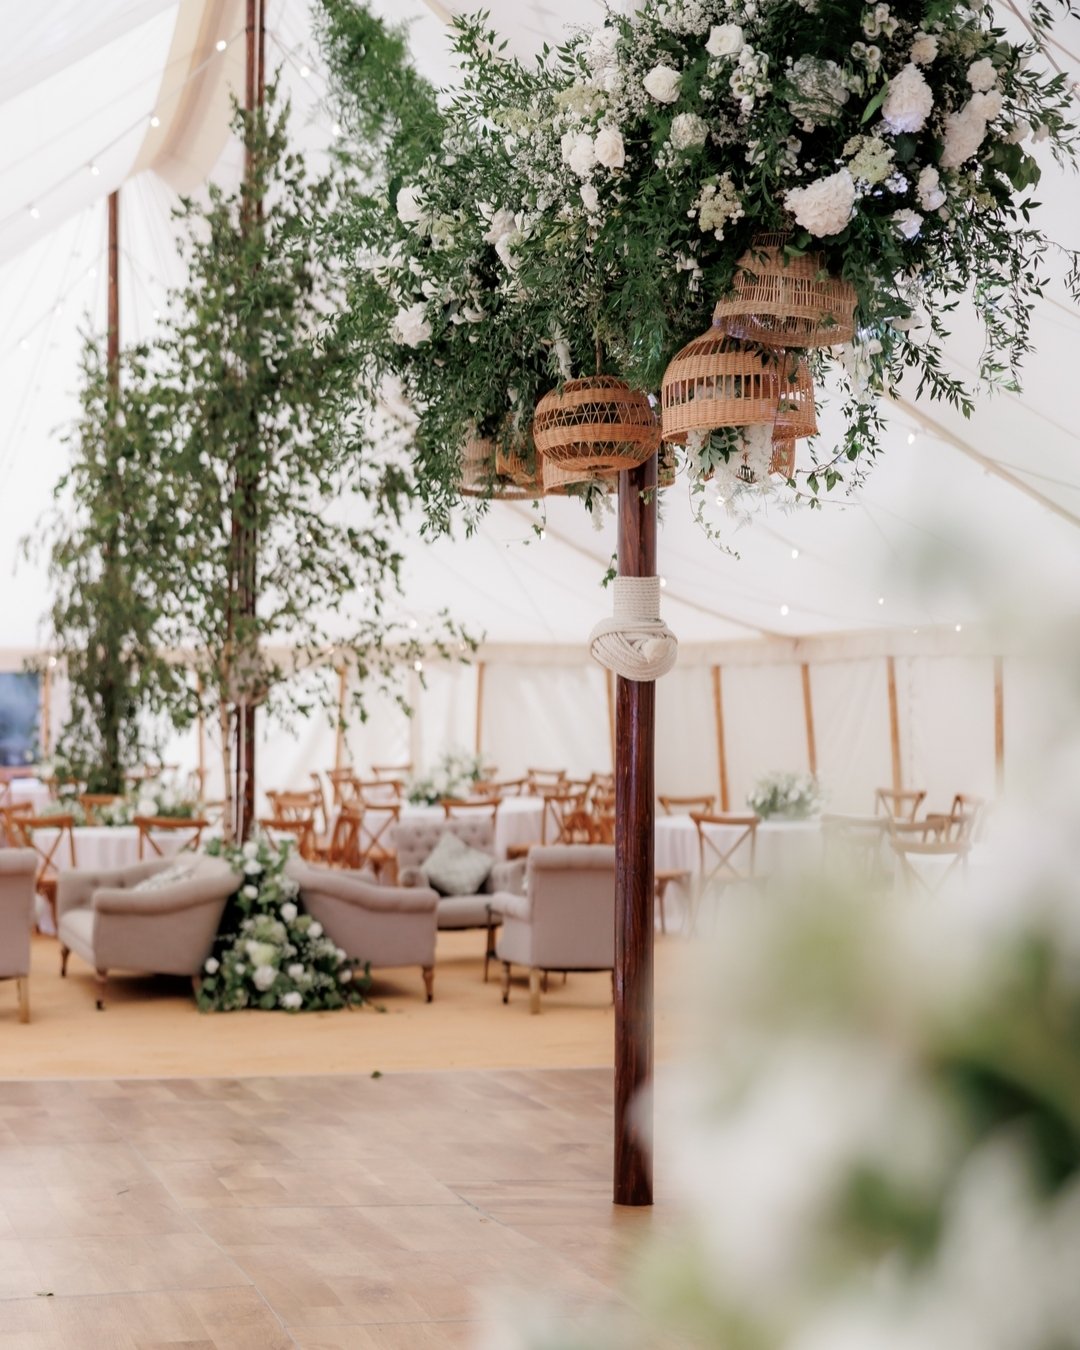 THE ultimate marquee vision: An expansive tent adorned with lush greenery, delicate white florals, and large trees, seamlessly blending the beauty of the outdoors with the elegance of your wedding celebration. 🌿✨

Swipe right to see more of this cou